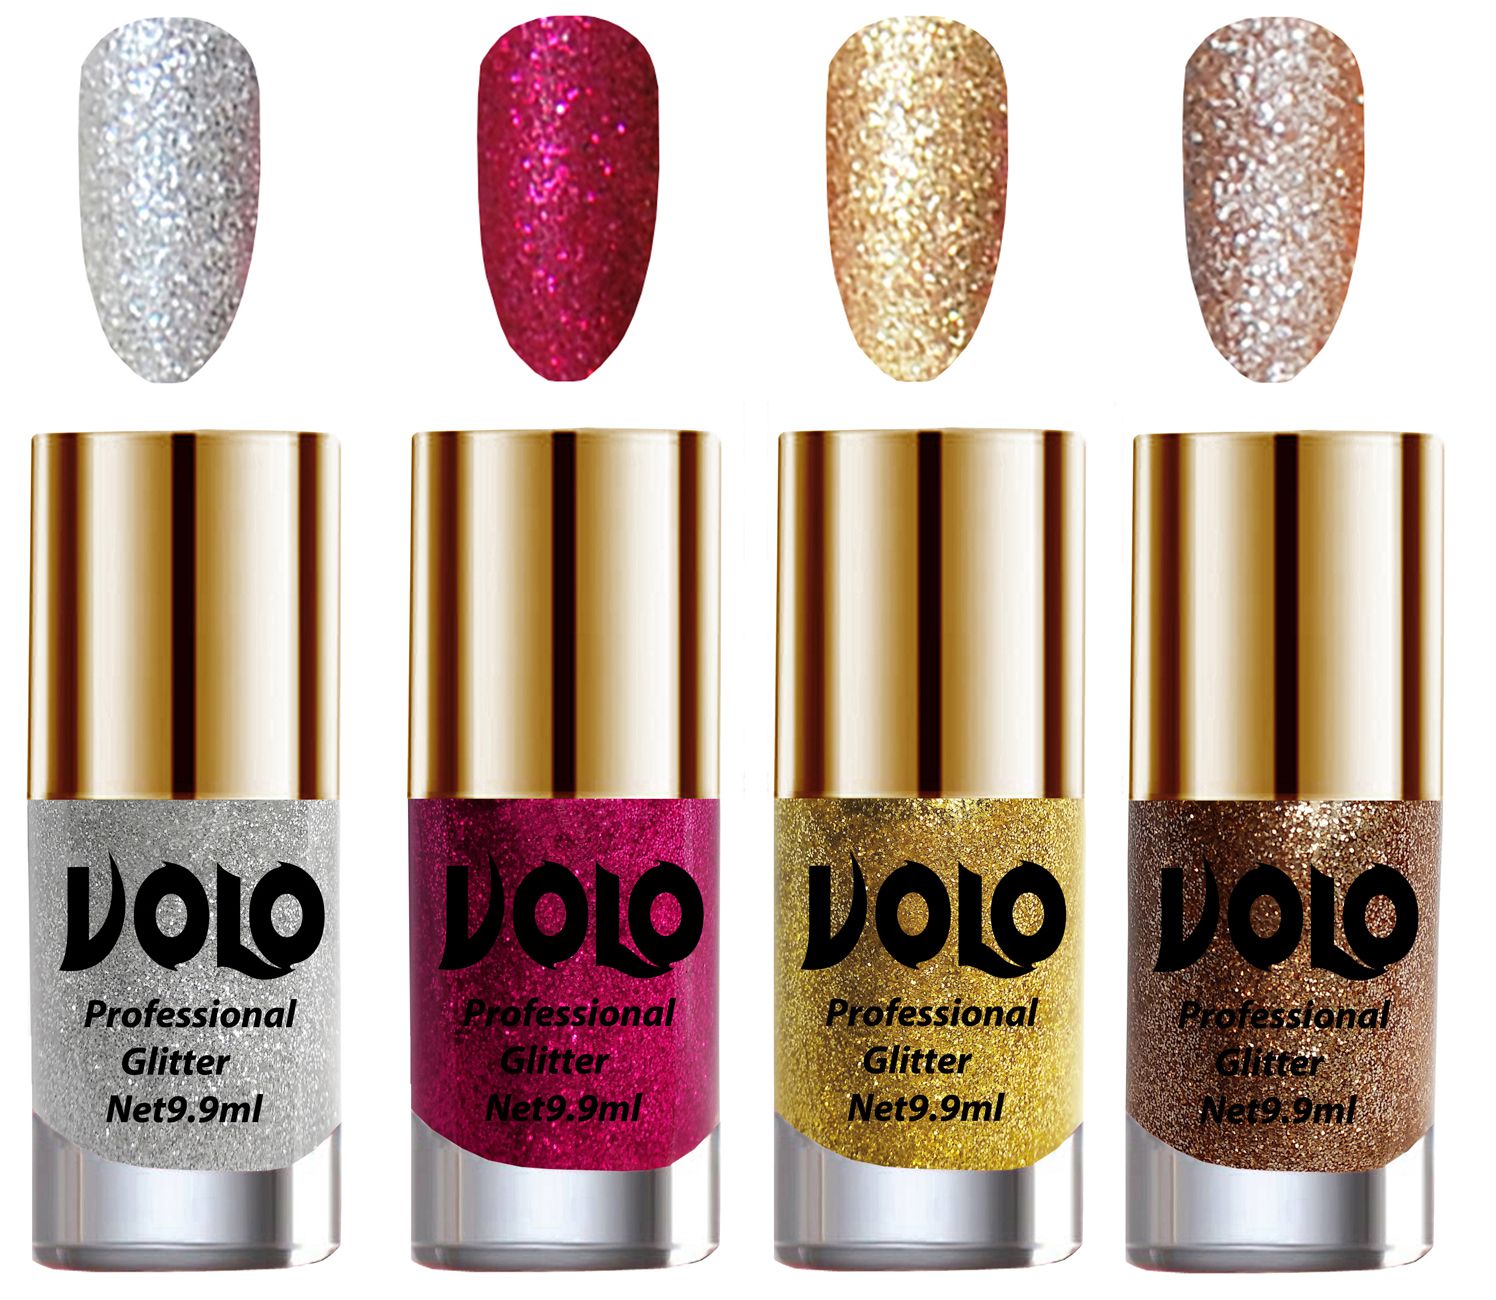     			VOLO Professionally Used Glitter Shine Nail Polish Silver,Magenta,Gold Gold Pack of 4 39 mL